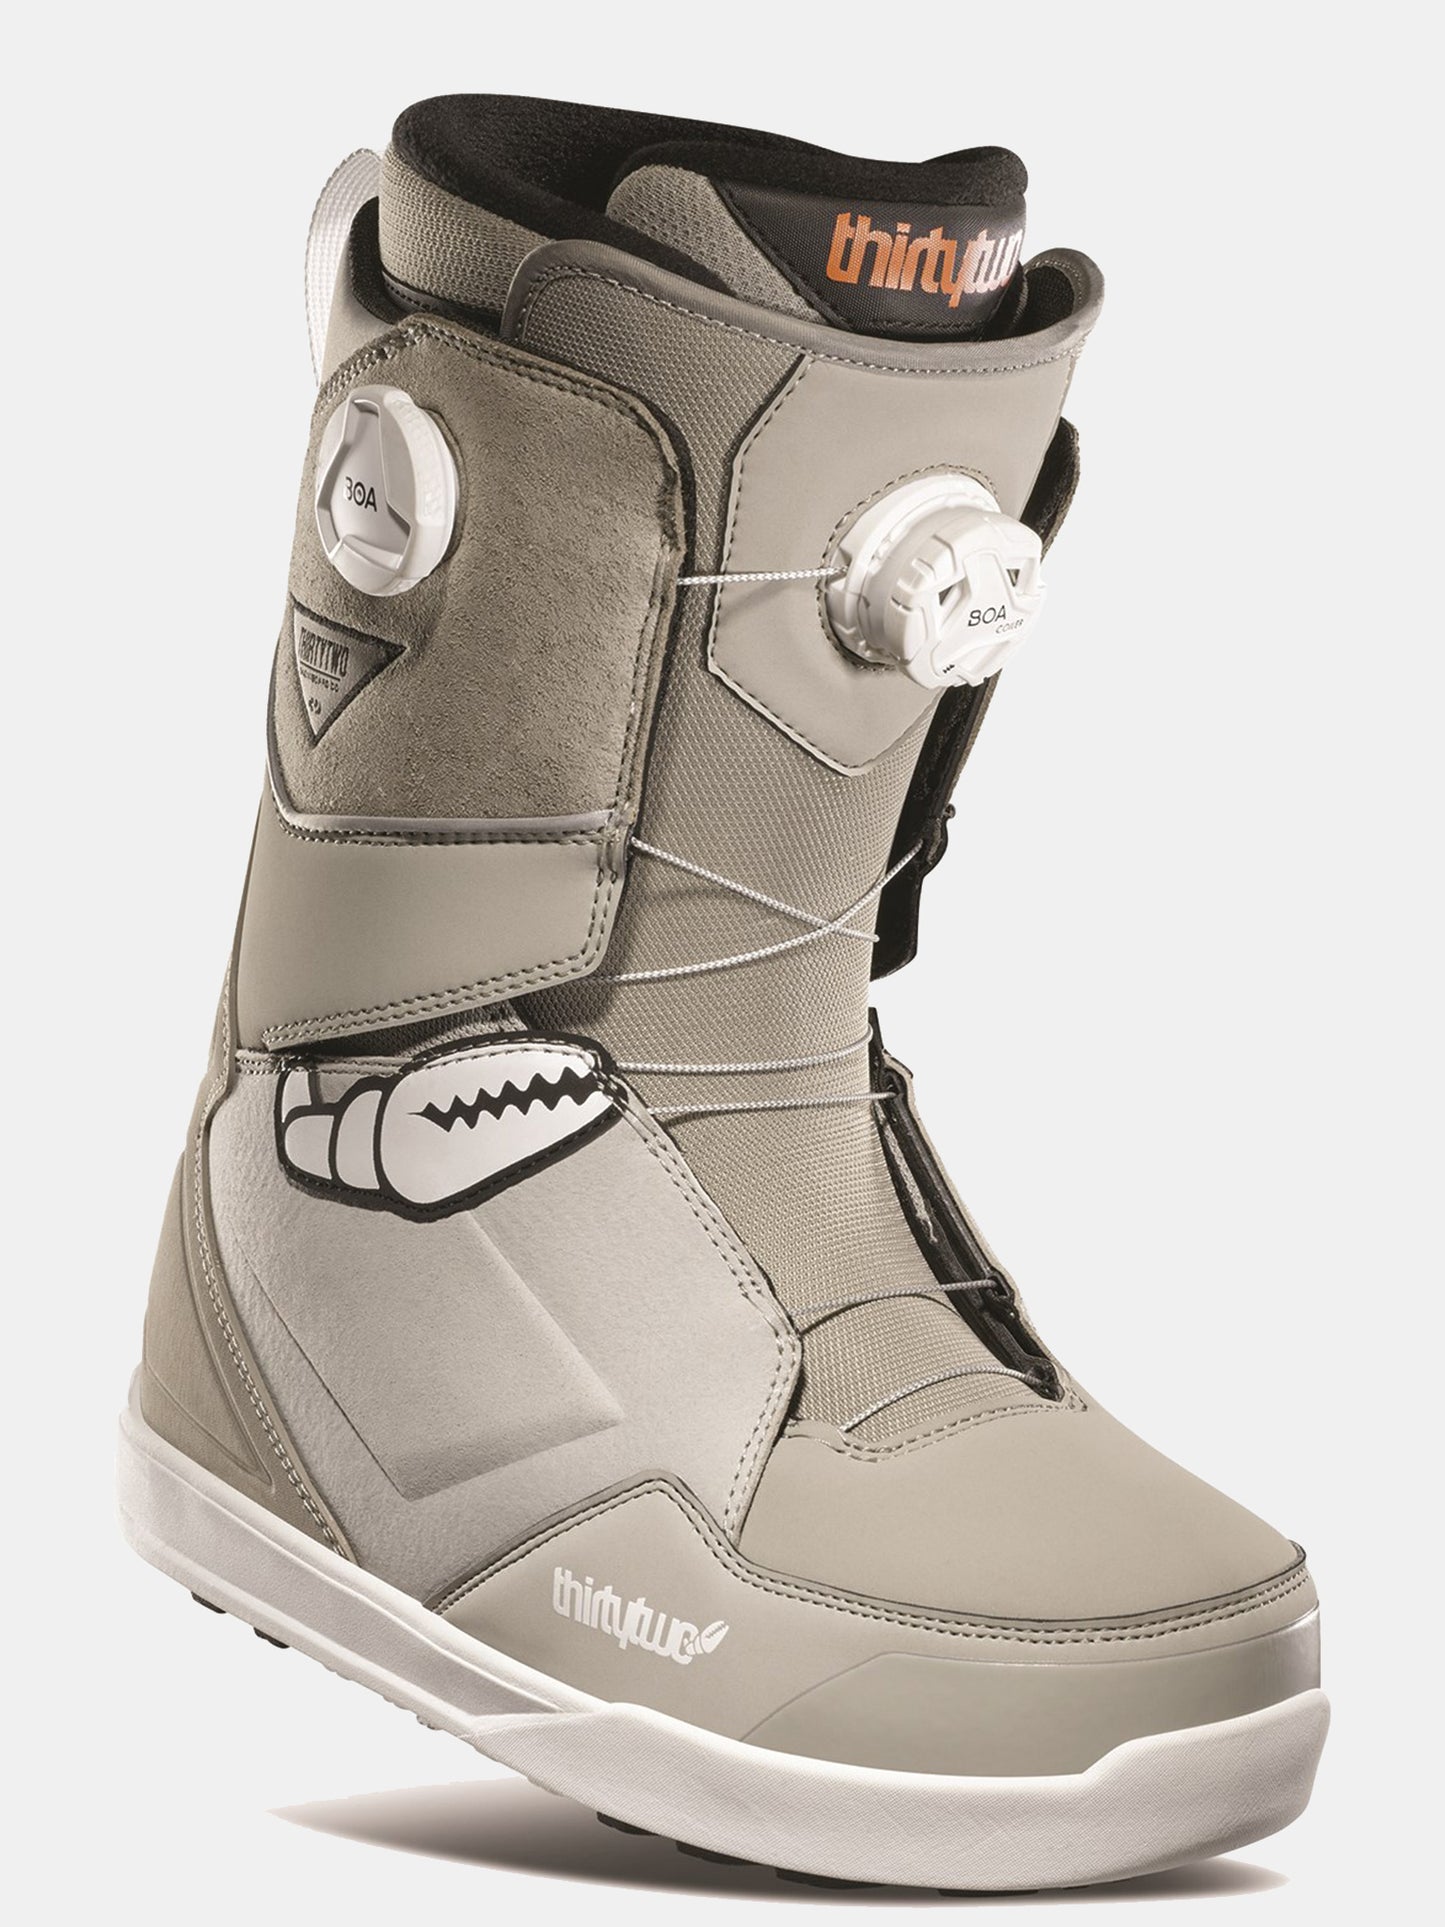 Thirtytwo Lashed Double Boa Crab Grab Snowboard Boots 2021